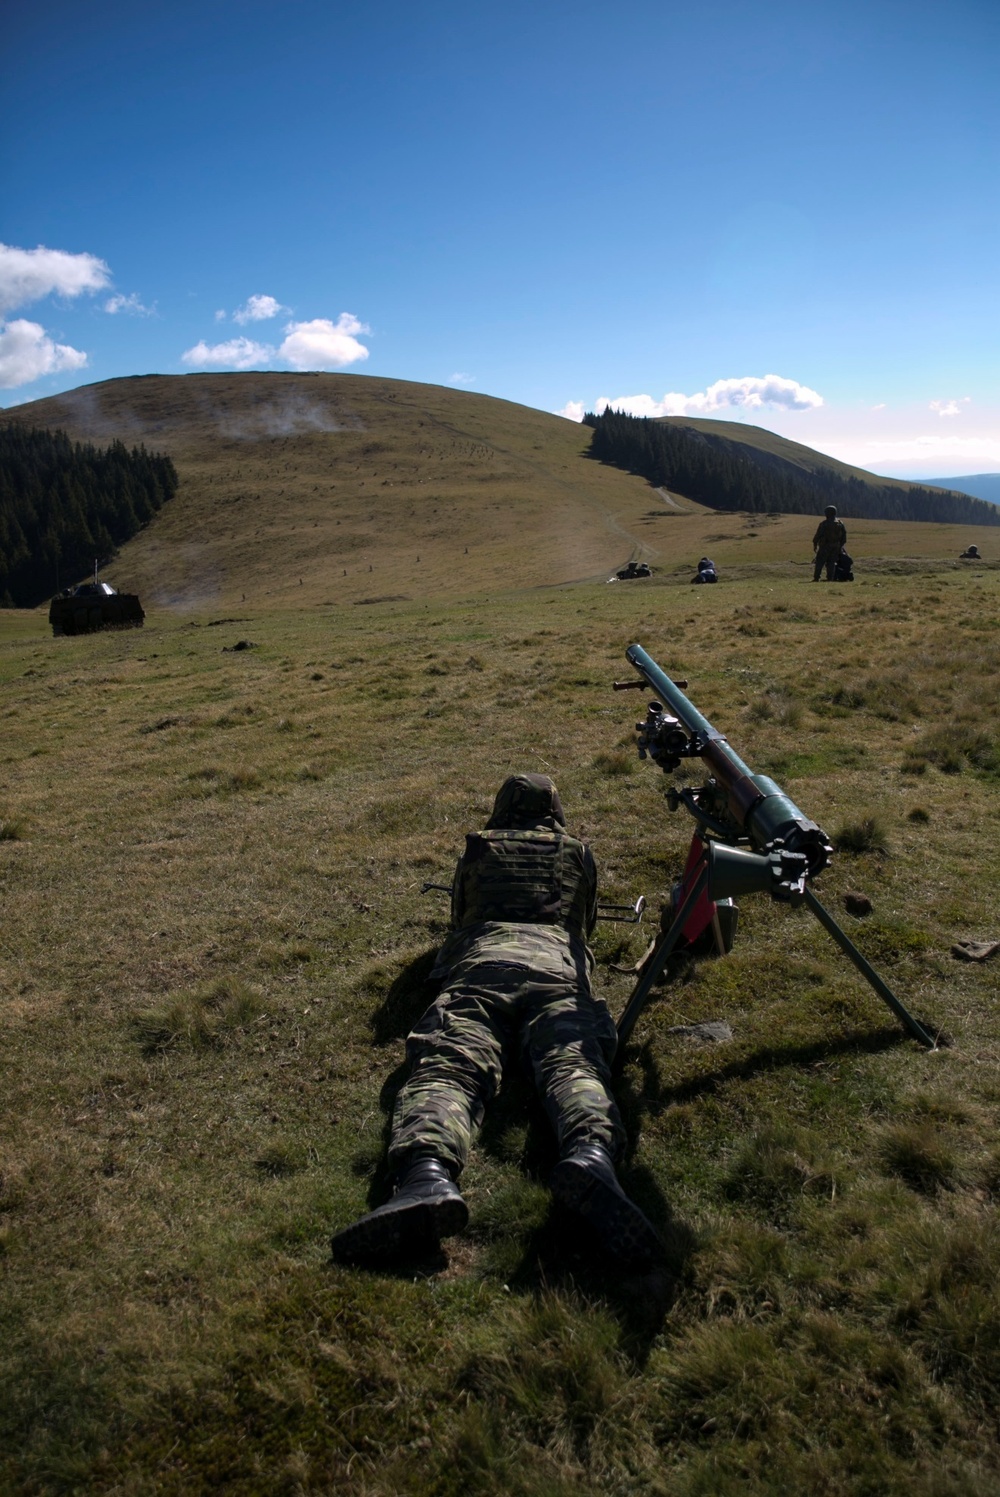 Marines, Romanians scale to new heights in Platinum Lynx exercise.